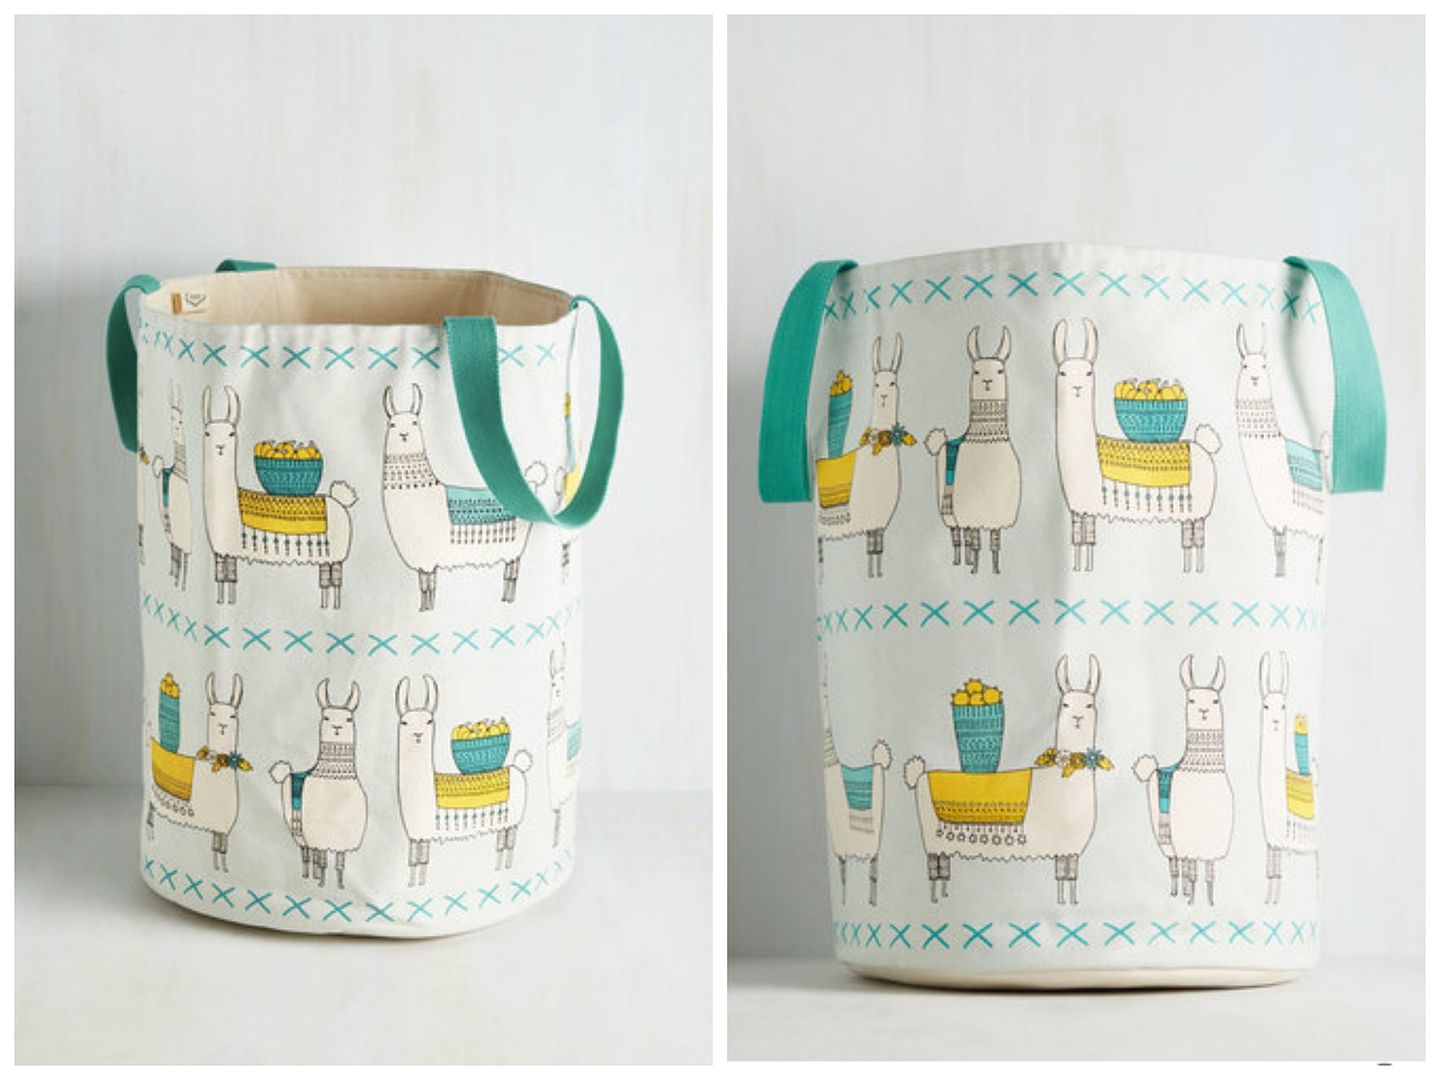 Not going to lie, I would probably use this Llama, I'm Coming Home Hamper as a tote/handbag. | Modcloth affiliate link